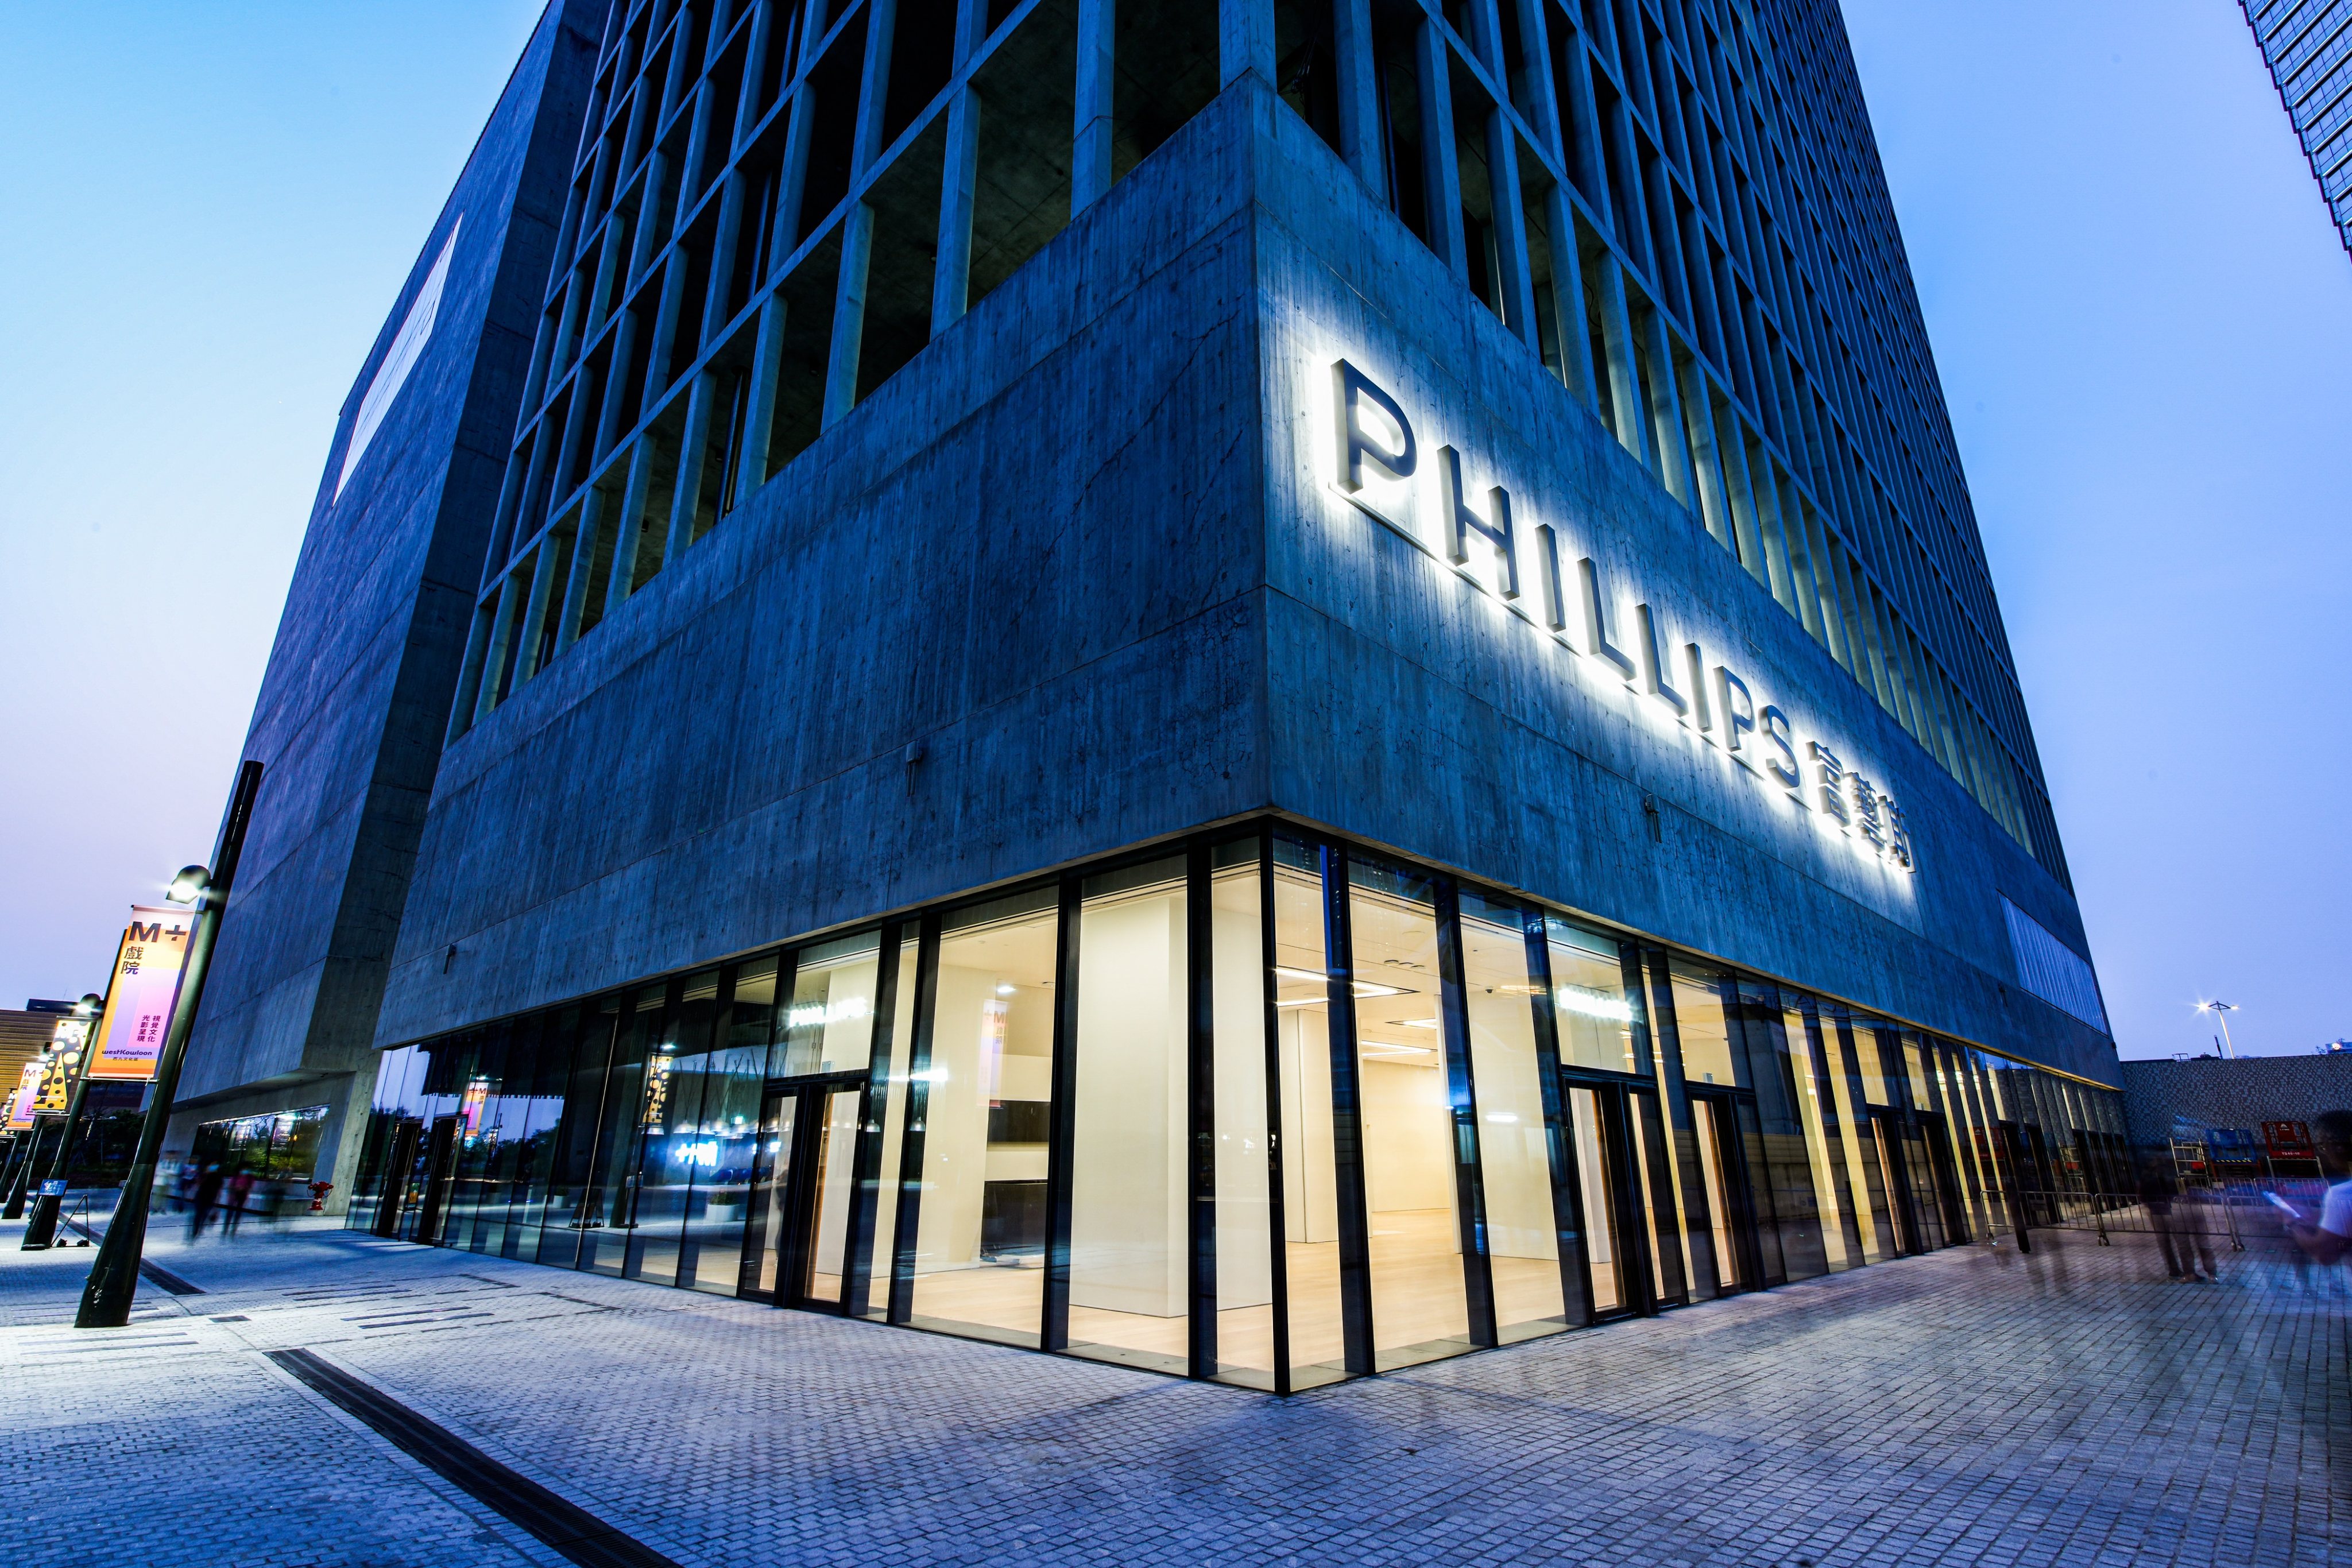 Auction house Phillips’ new six-storey Asian headquarters opened in March at Hong Kong’s West Kowloon Cultural District.